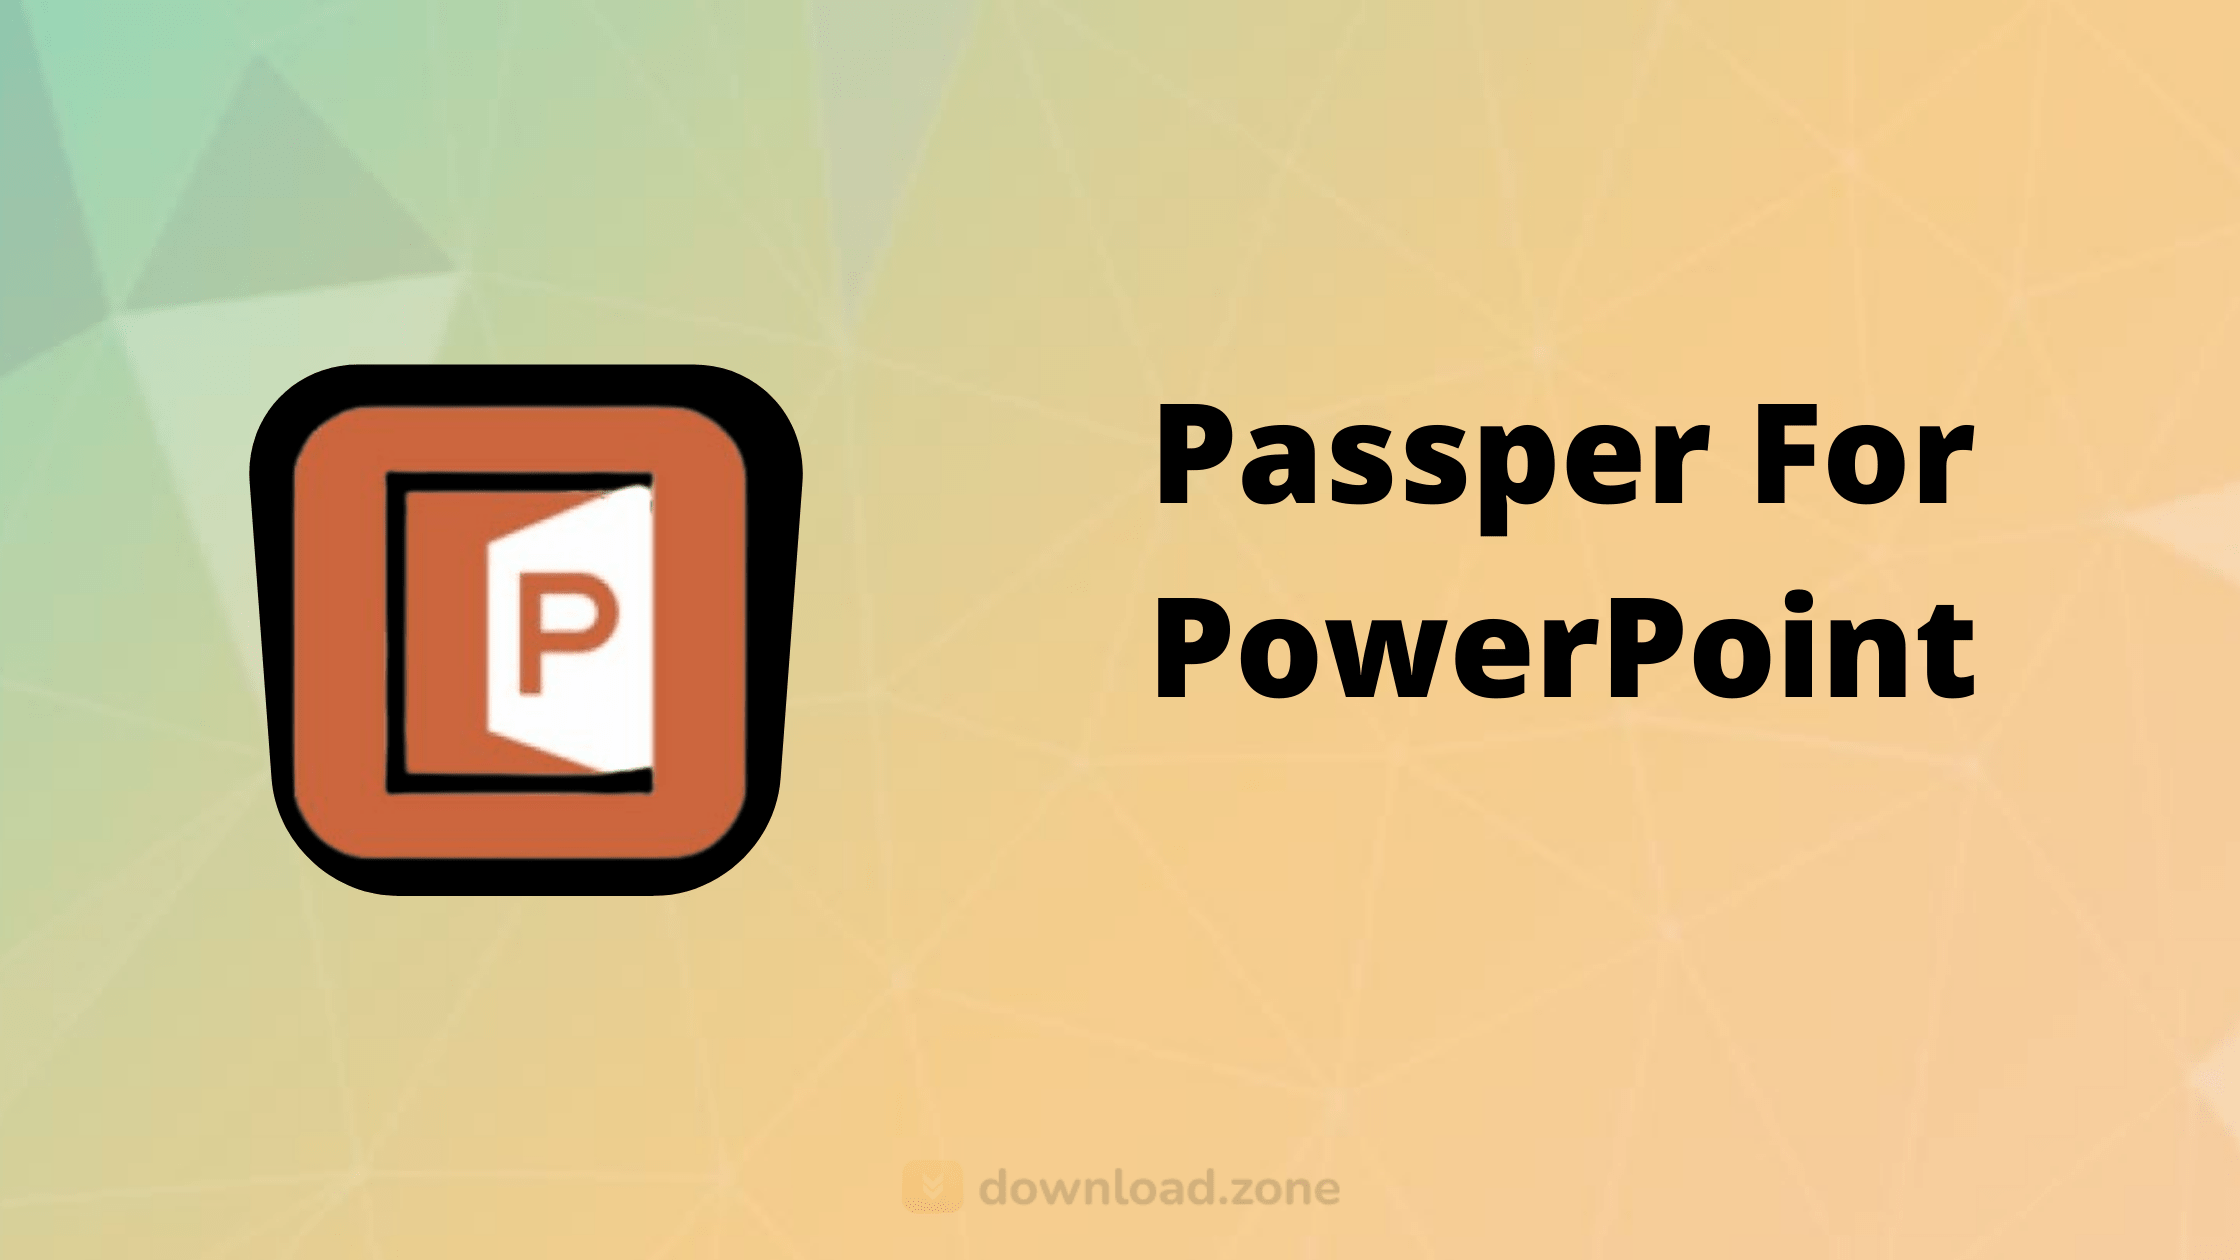 passper-for-powerpoint-software-download-for-pc-5492457-5158911